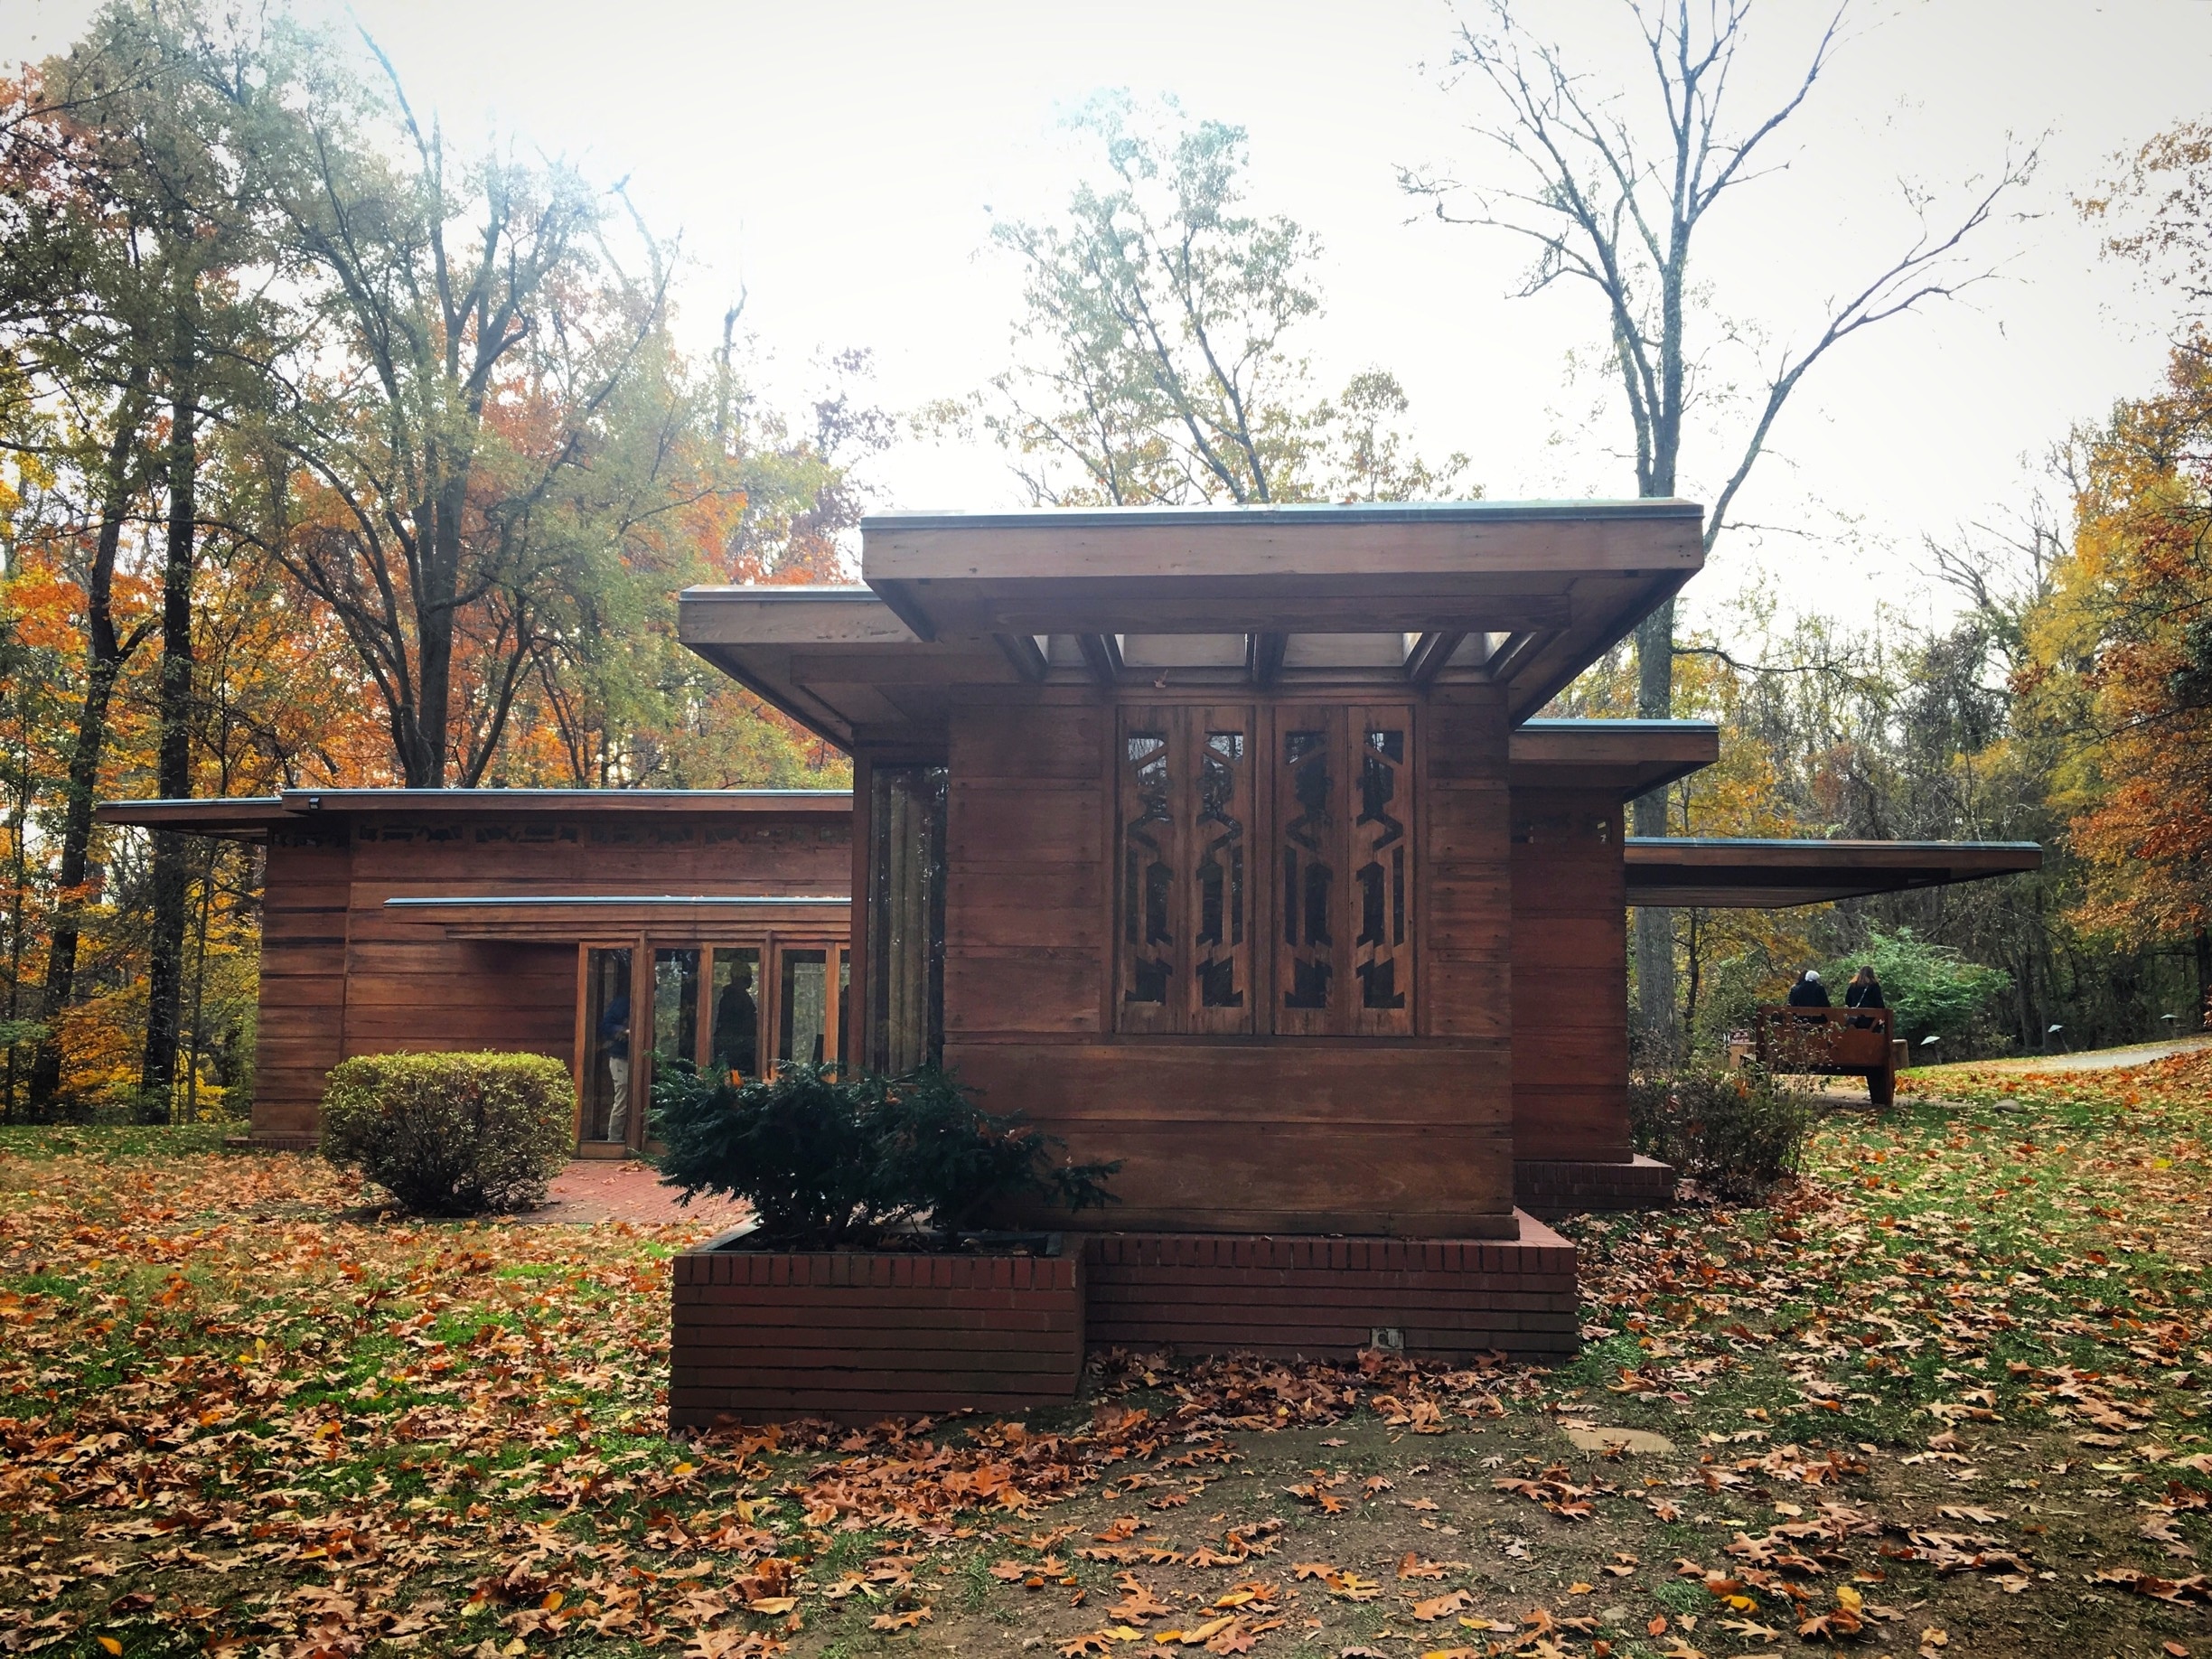 Toured the beautifully, simplistic Pope Leighey House by Frank Lloyd Wright. 